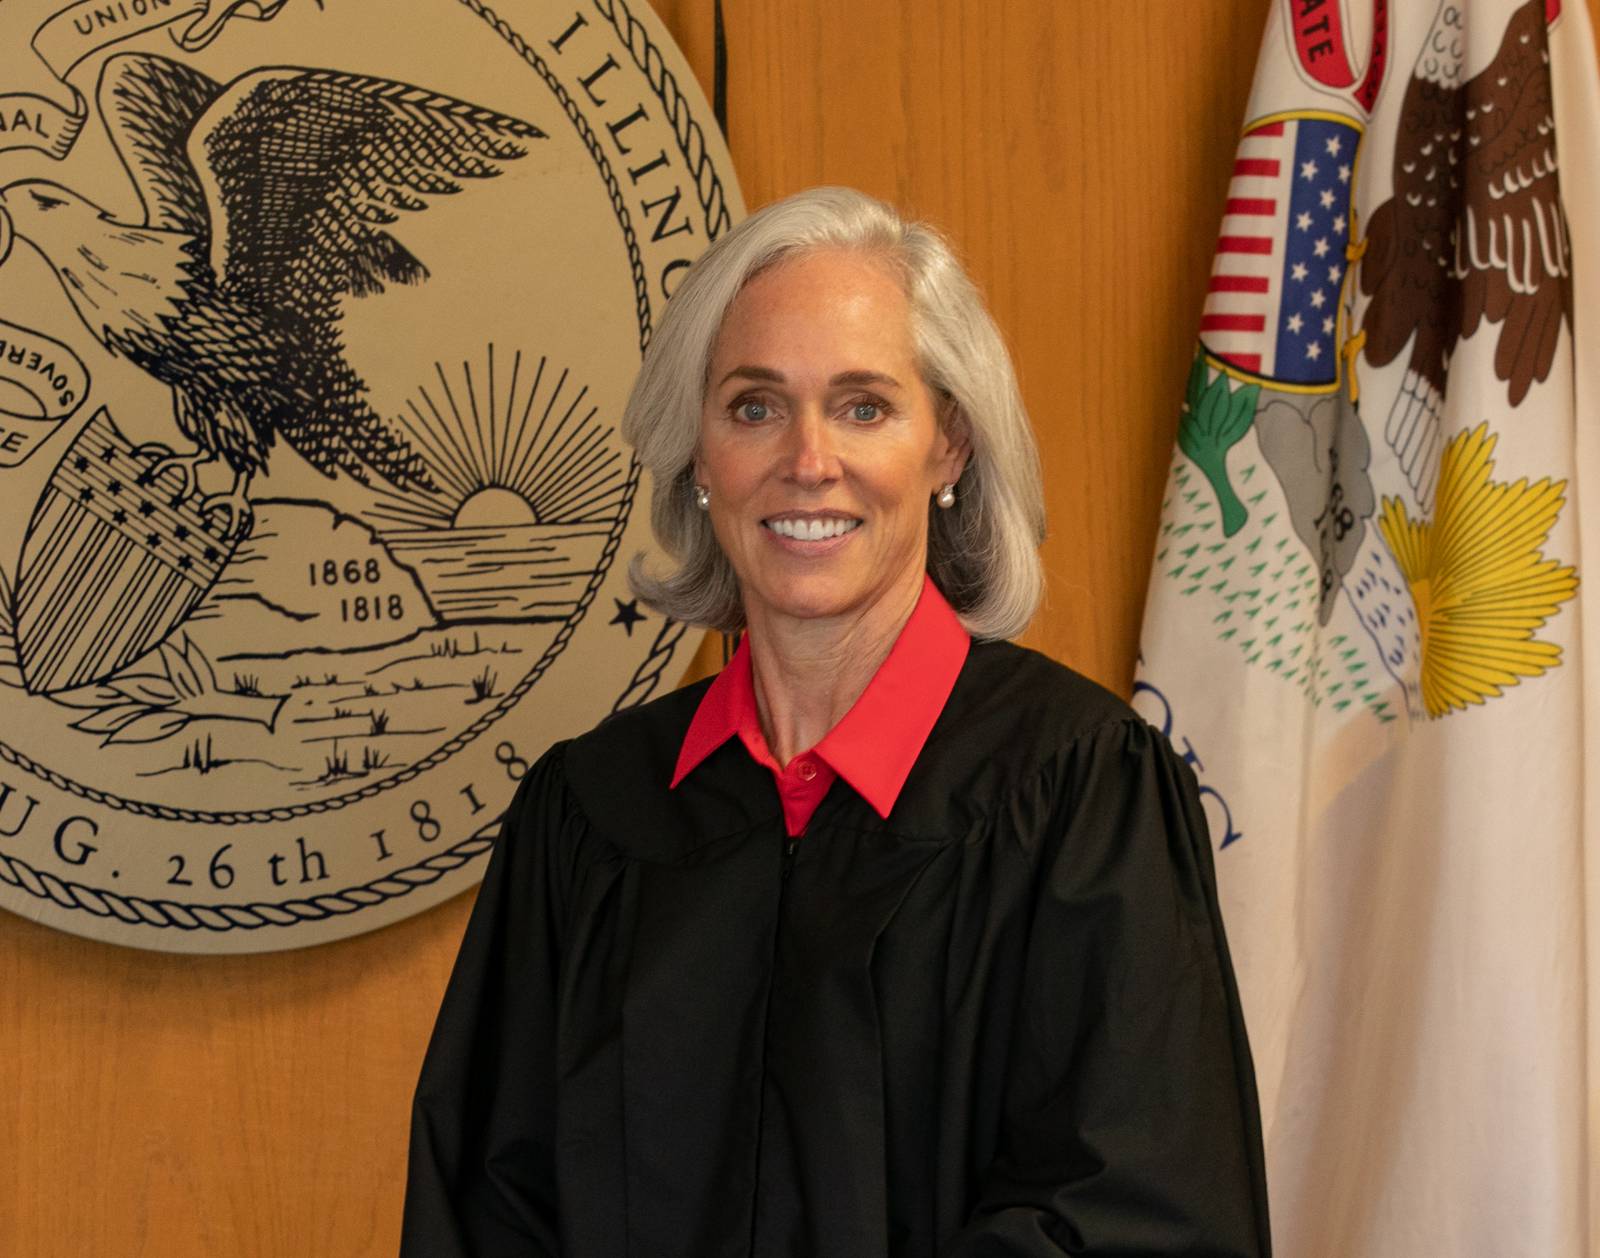 Kane Judge Boles seeks election to Illinois Appellate Court Shaw Local